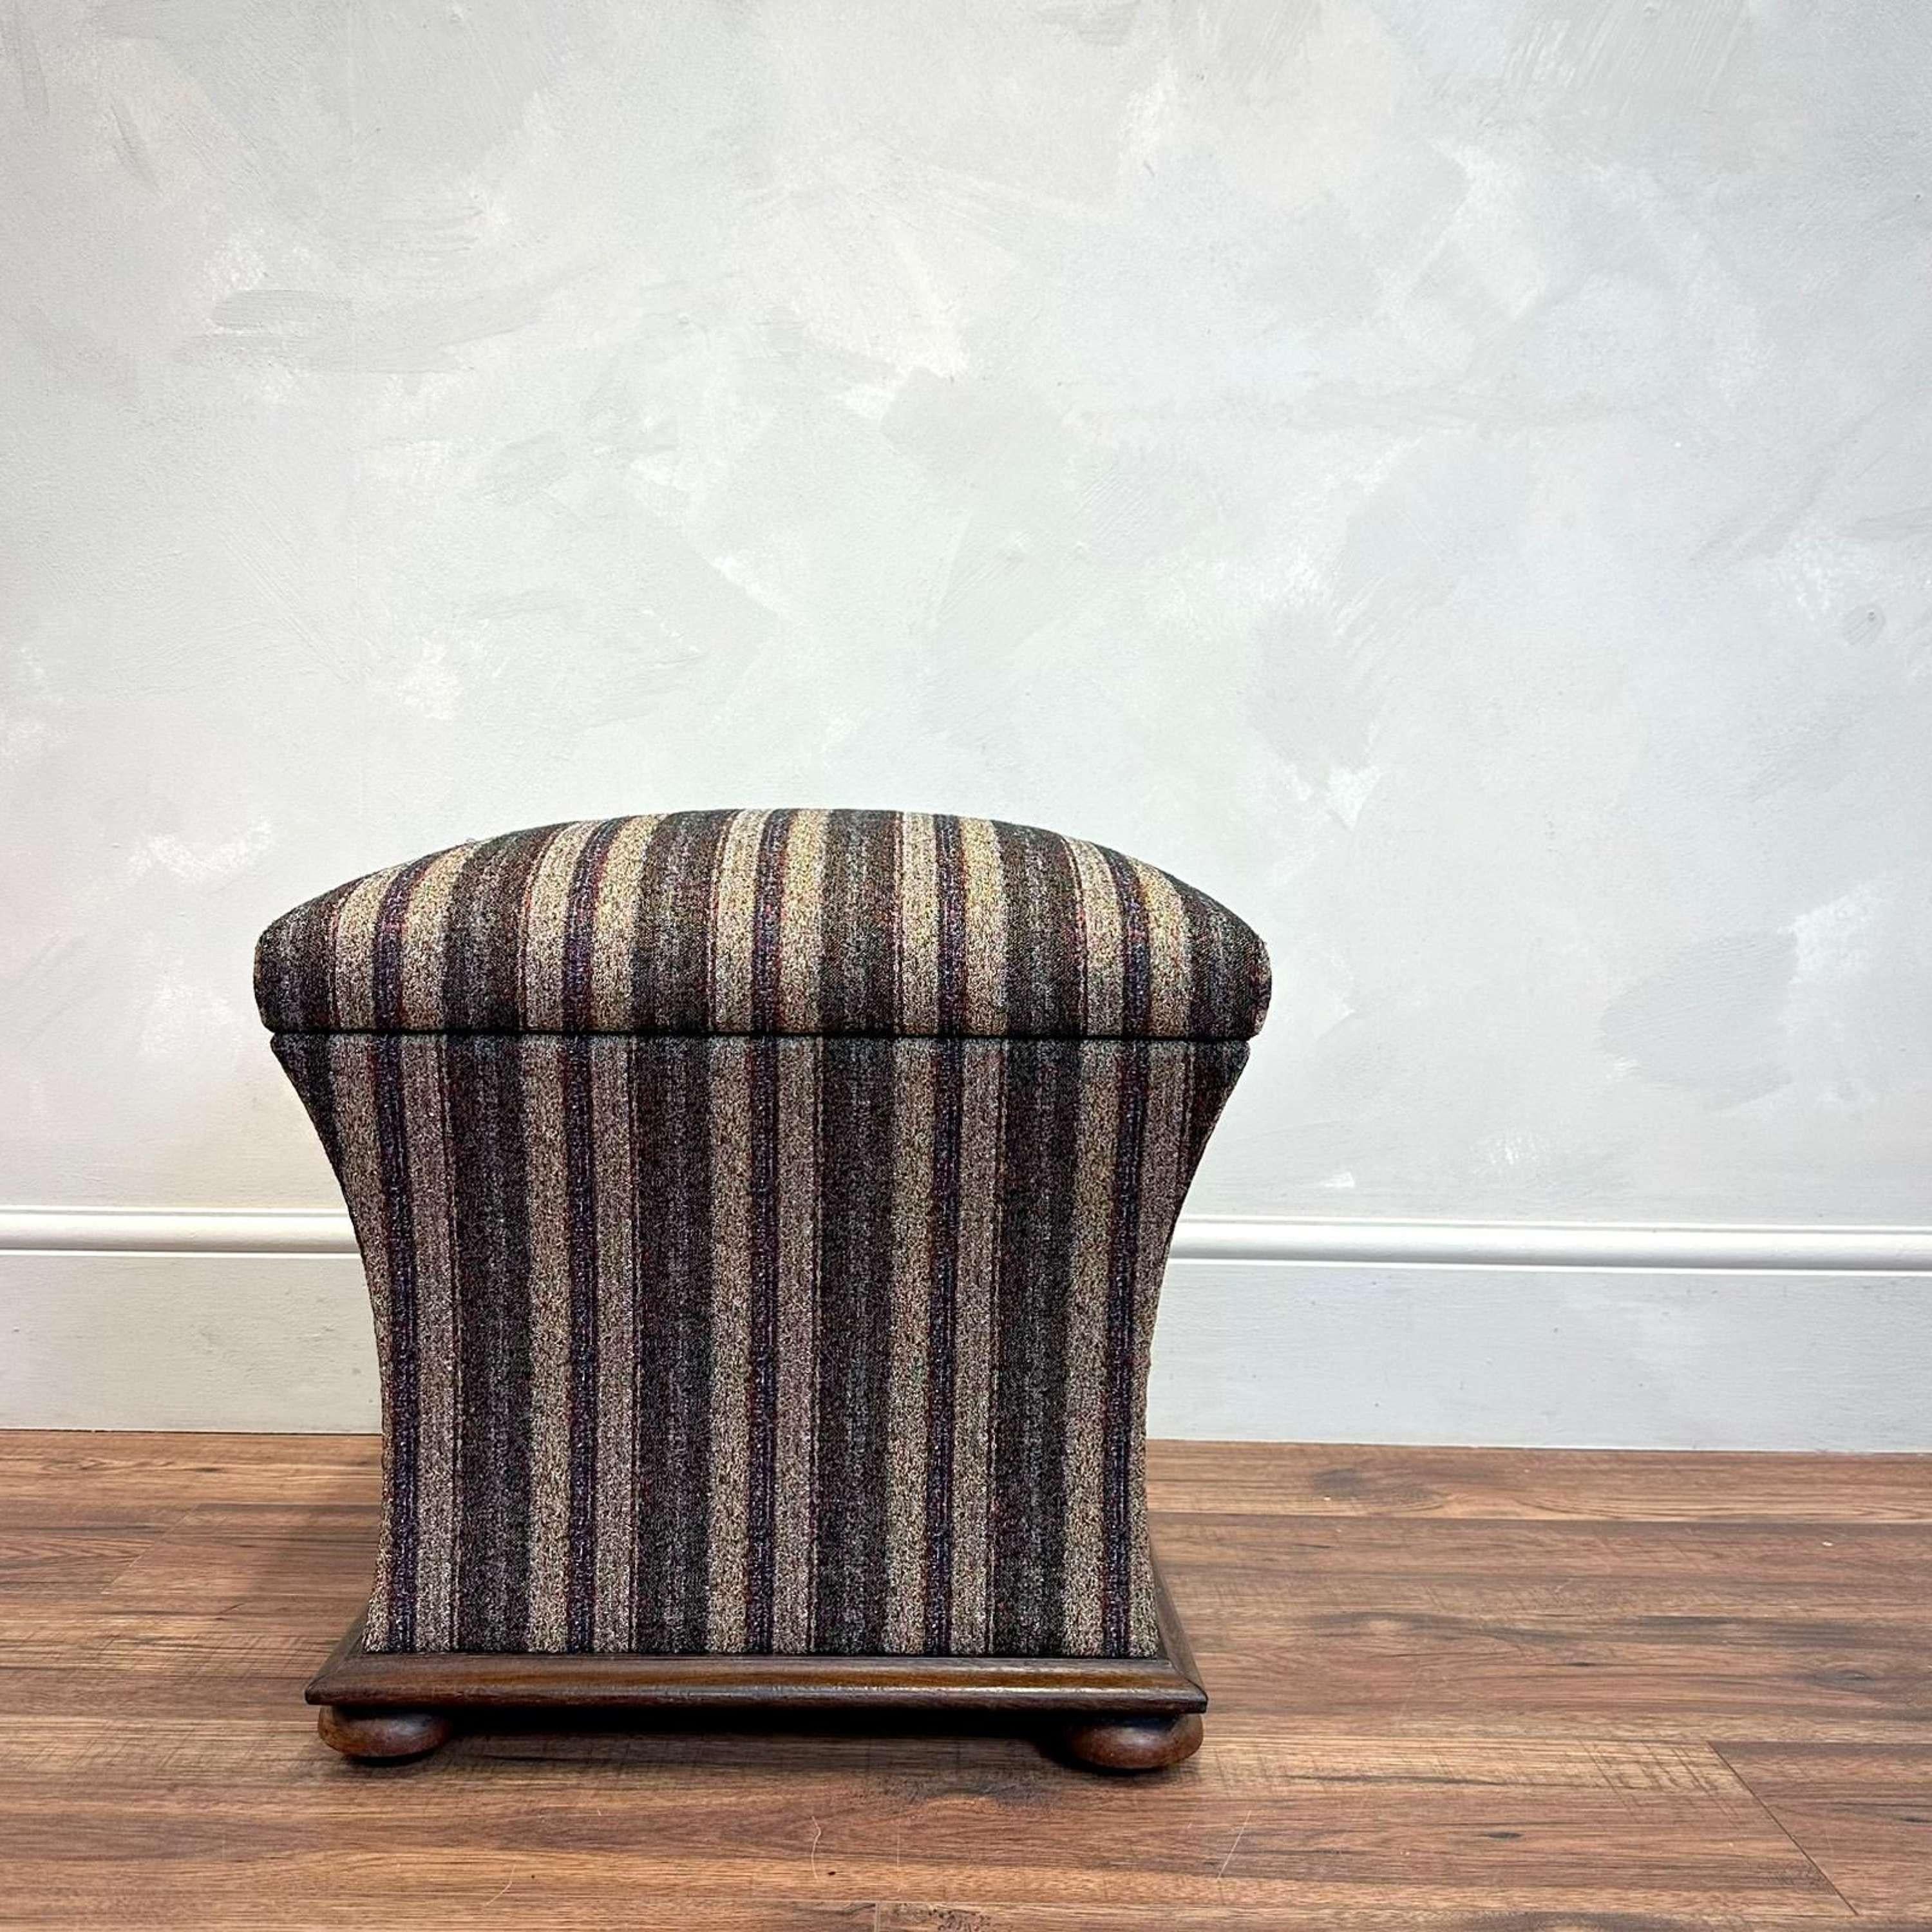 English 19th Century upholstered footstool

Mahogany base with turned bun feet 
Lovely quality striped fabric with calico lining 

Height - 42 cm 
Width - 48 cm
Depth - 42.5 cm
Please message if any further info or photos are required 

We are happy